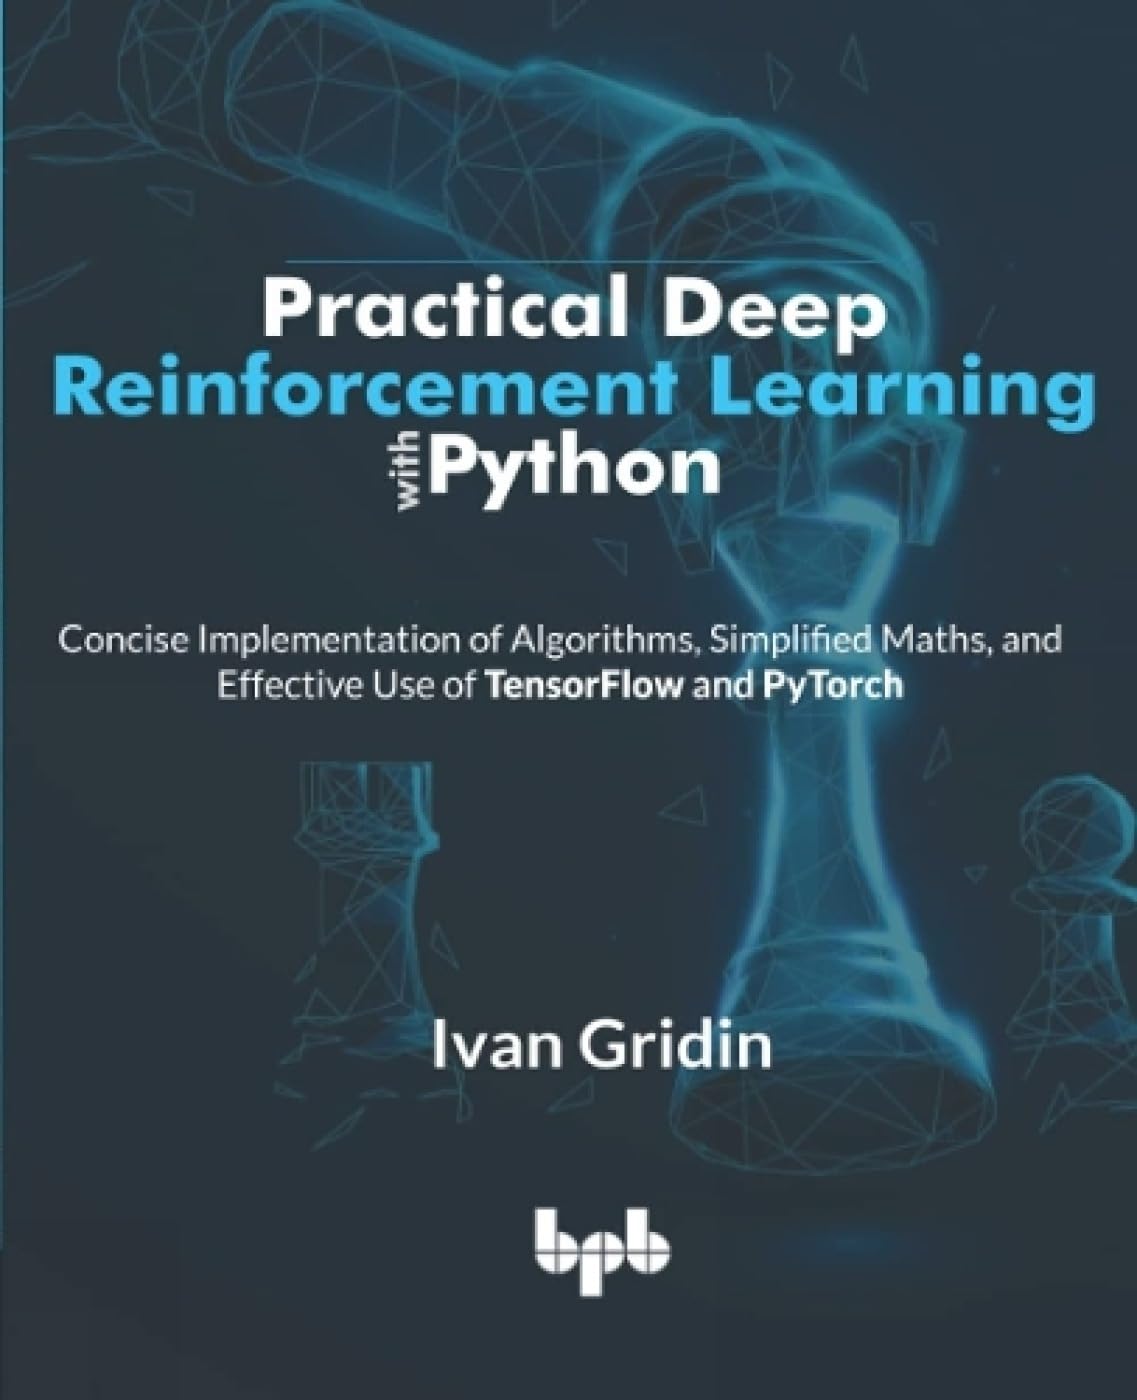 Practical Deep Reinforcement Learning with Python: Concise Implementation of Algorithms, Simplified Maths, and Effective Use of TensorFlow and PyTorch by  Ivan Gridin